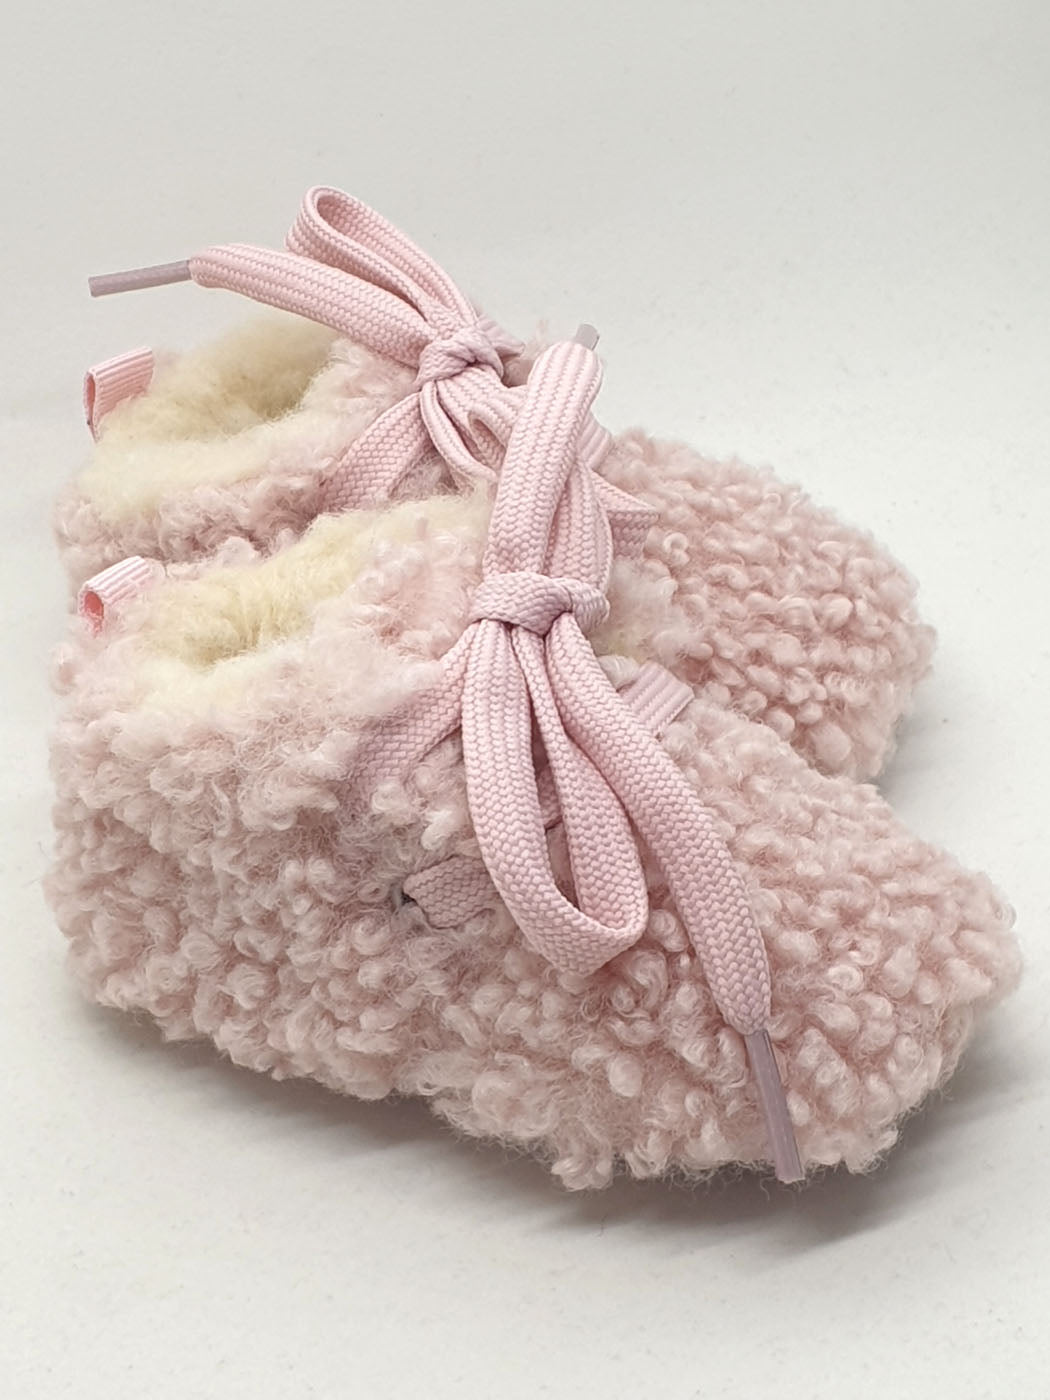 COC-TEDDY NEWBORN shoe with Faux fur-pink